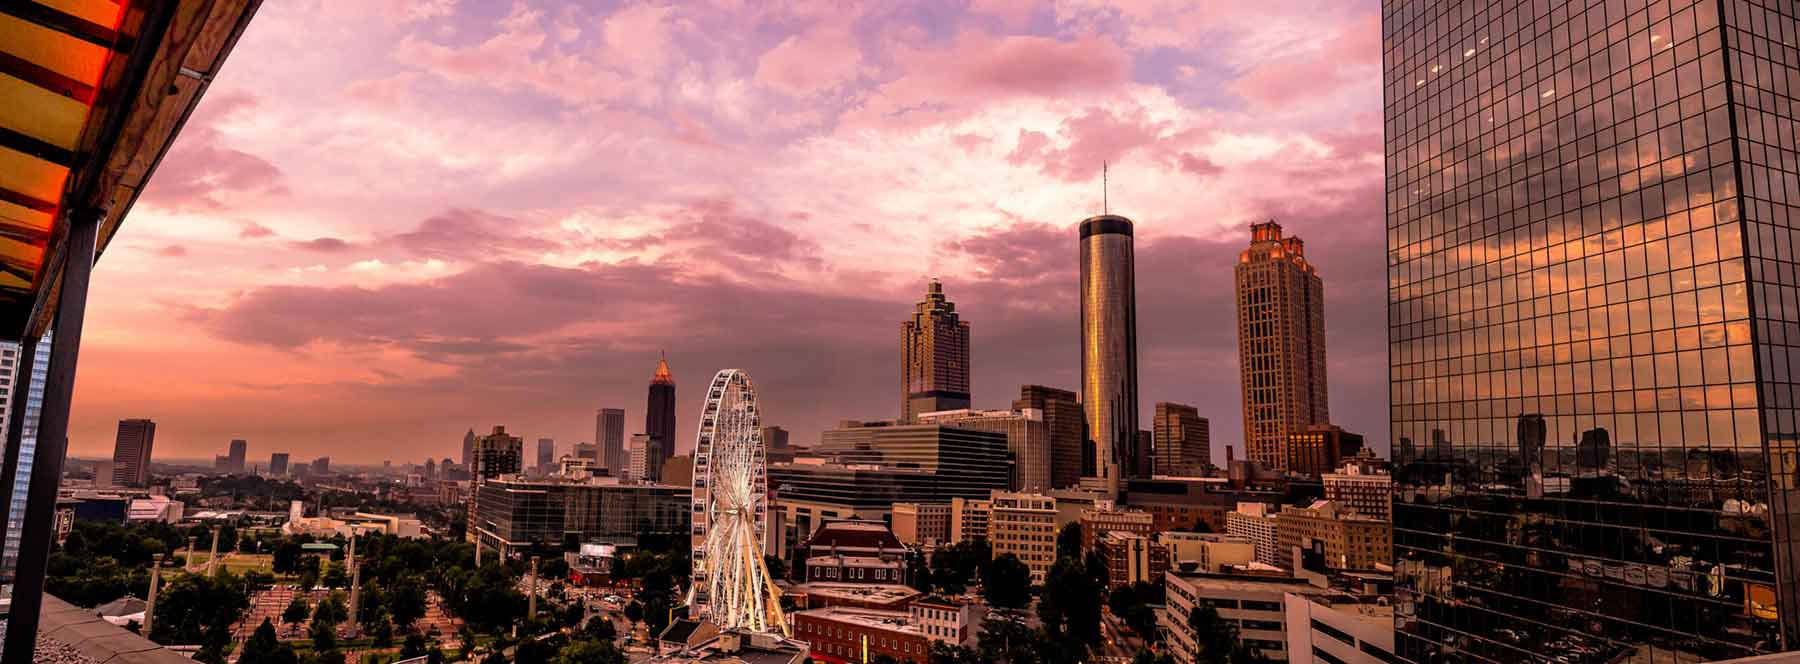 City of Atlanta with purple clouds